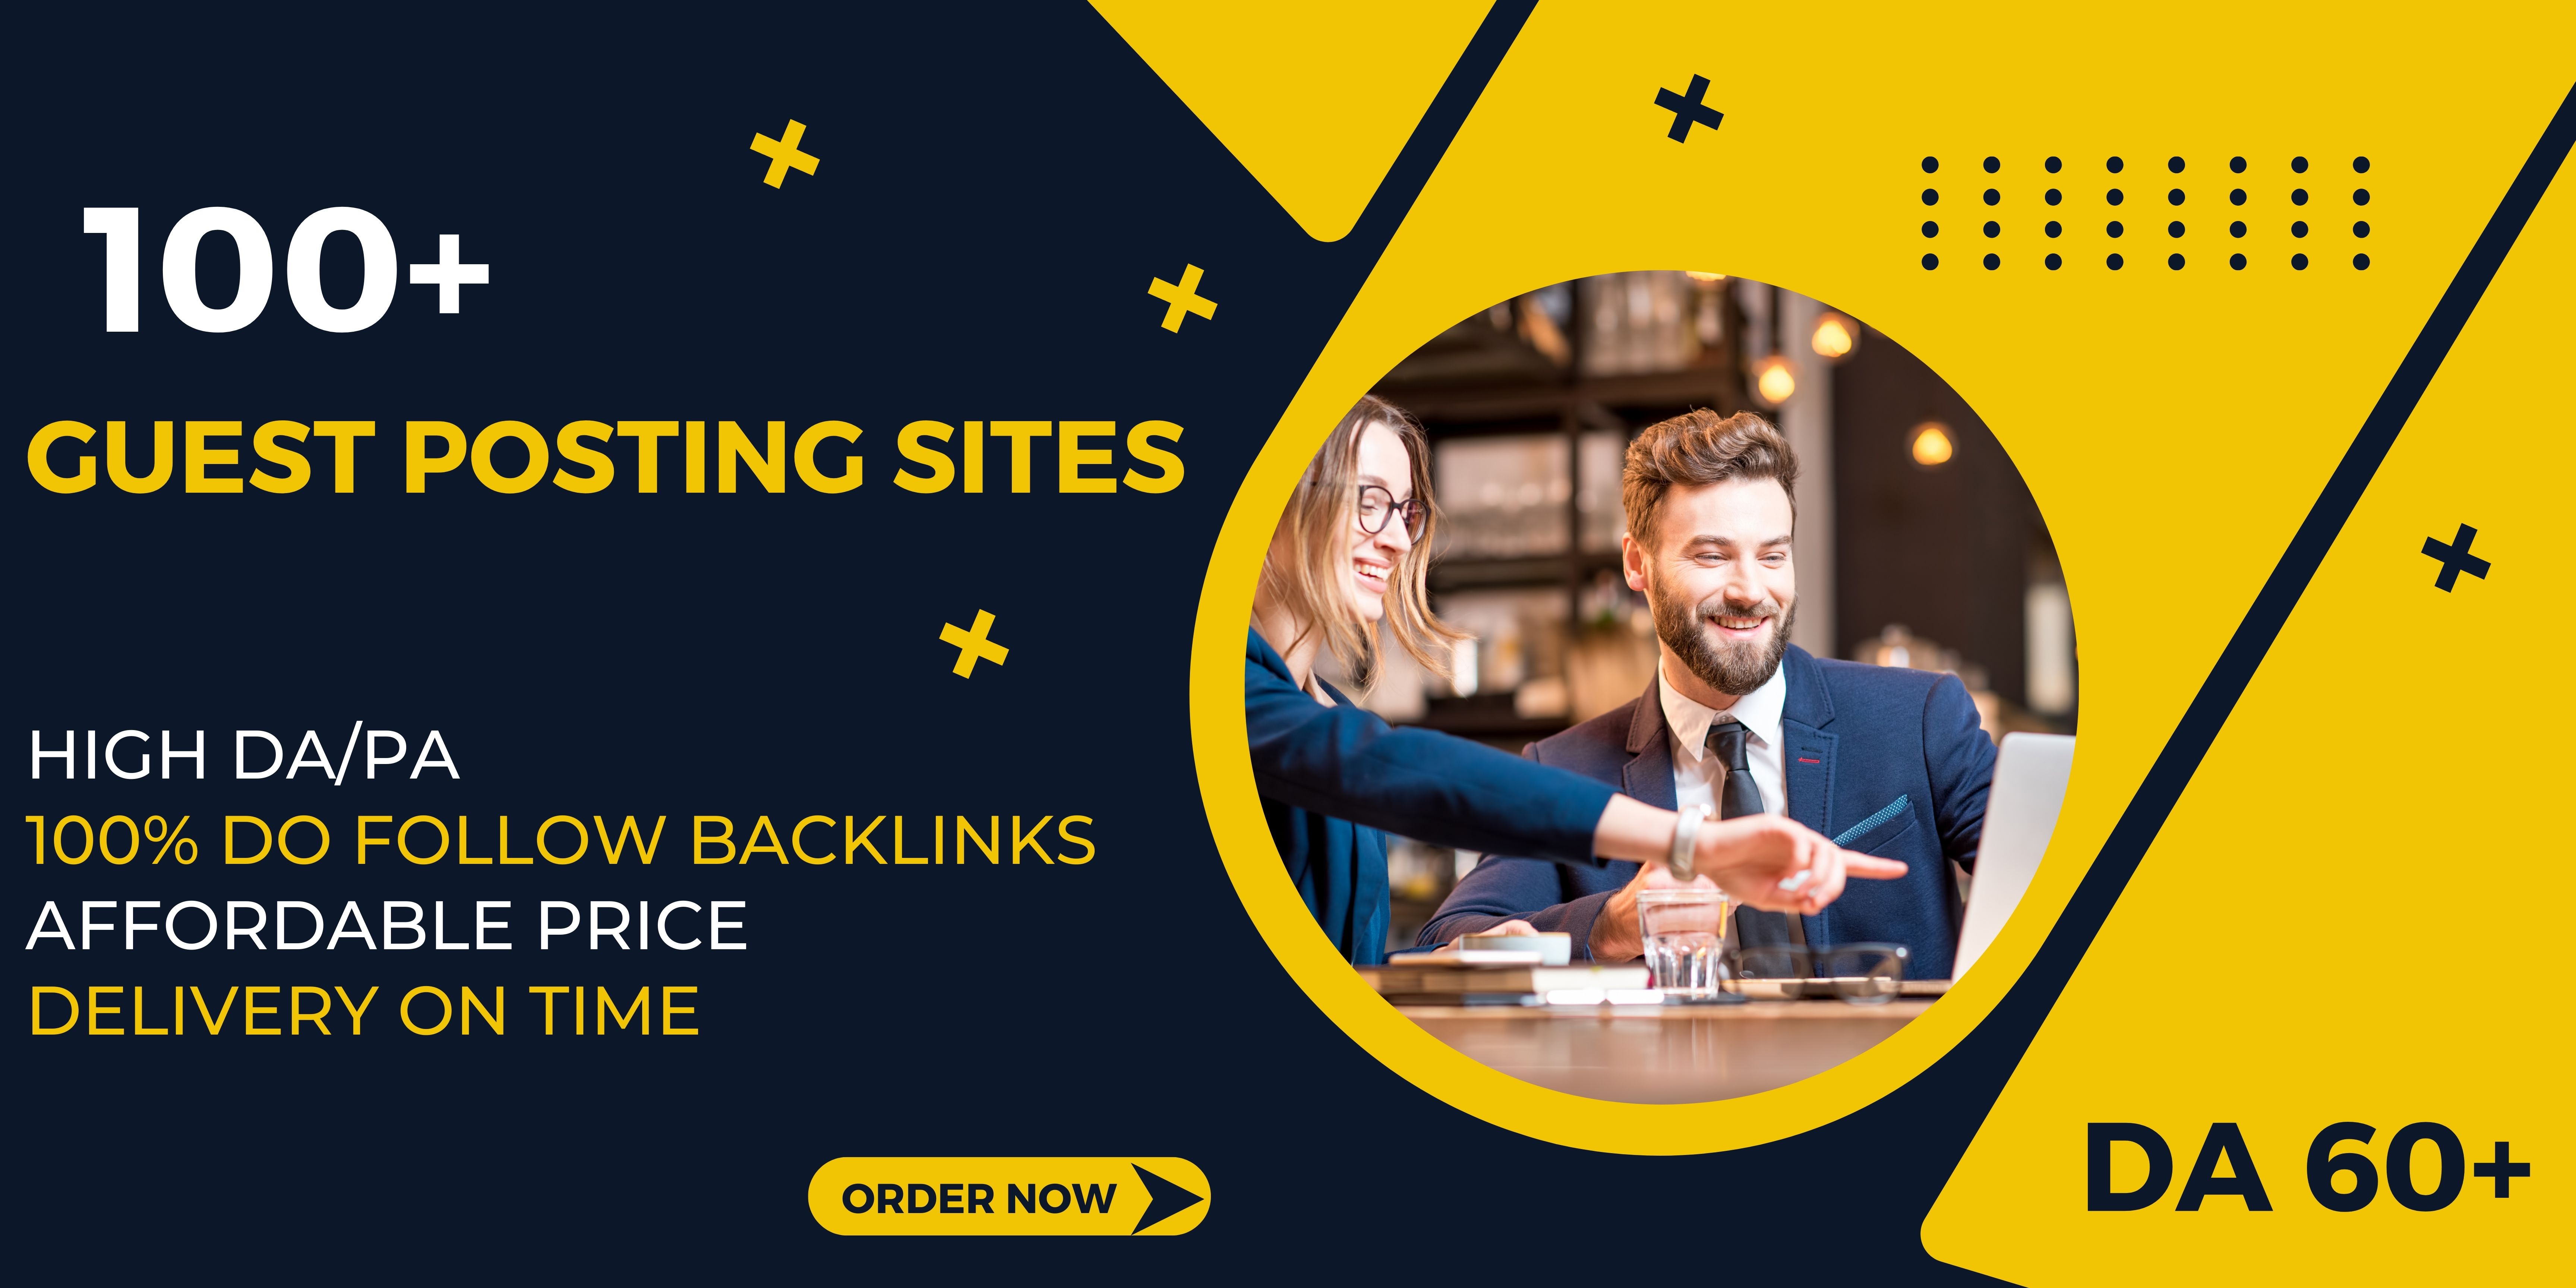 Get top guest posting sites to amplify your online presence. Boost your SEO, build backlinks, and reach a wider audience. Start guest blogging today!